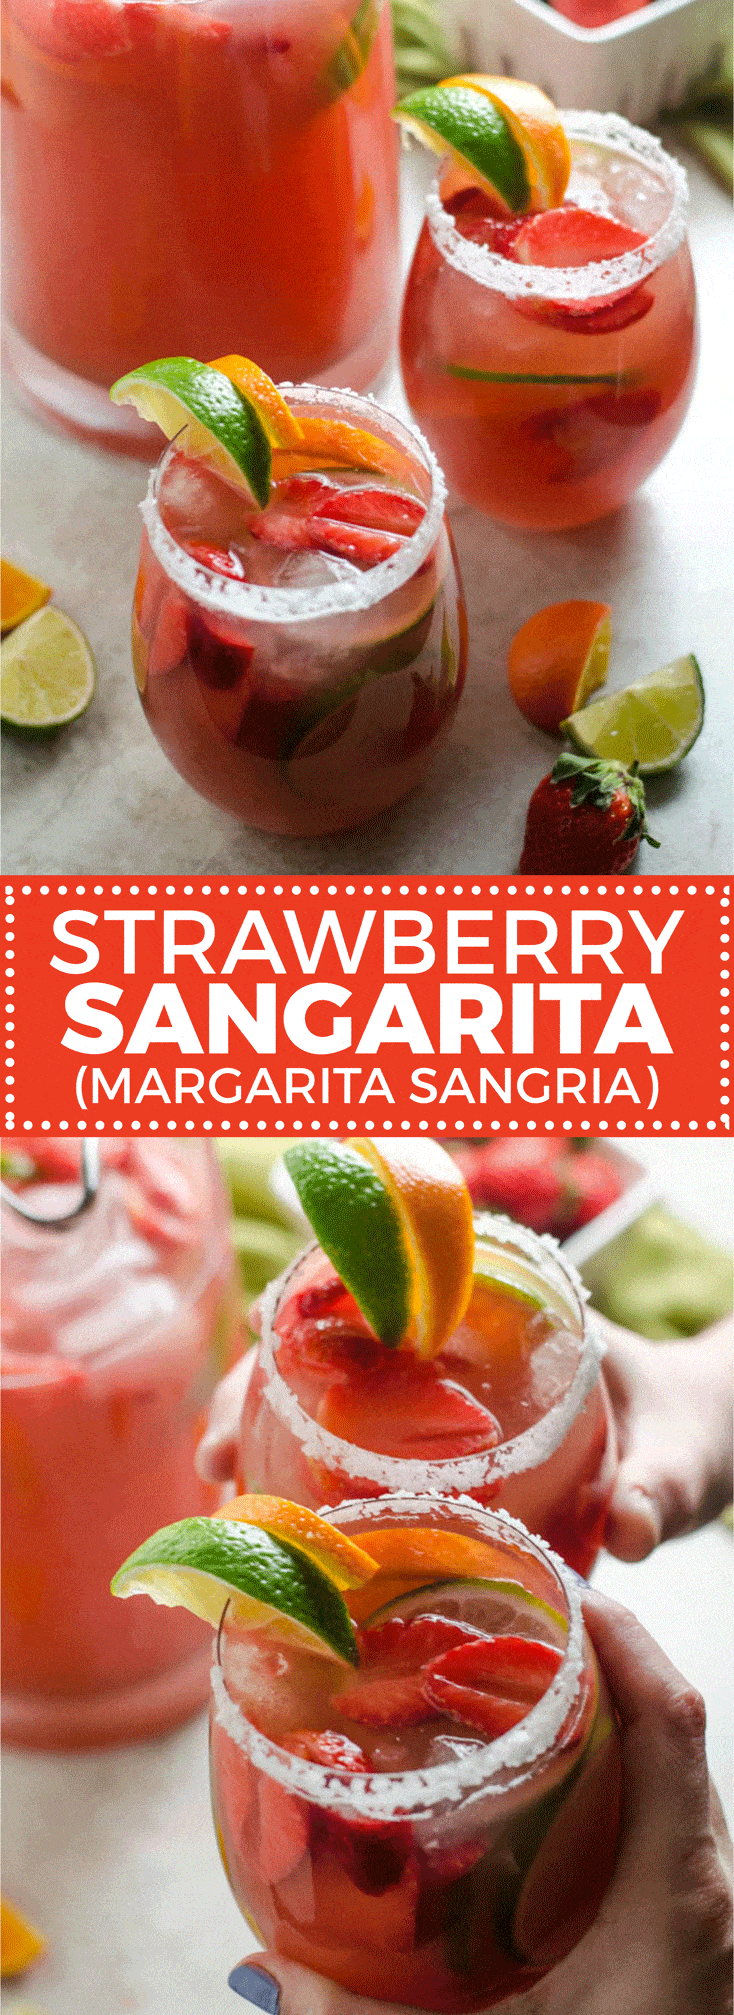 Spend this weekend sipping Strawberry Sangarita-- the love child of margaritas and sangria. This cocktail is over-the-top delicious and perfect for parties. | hostthetoast.com